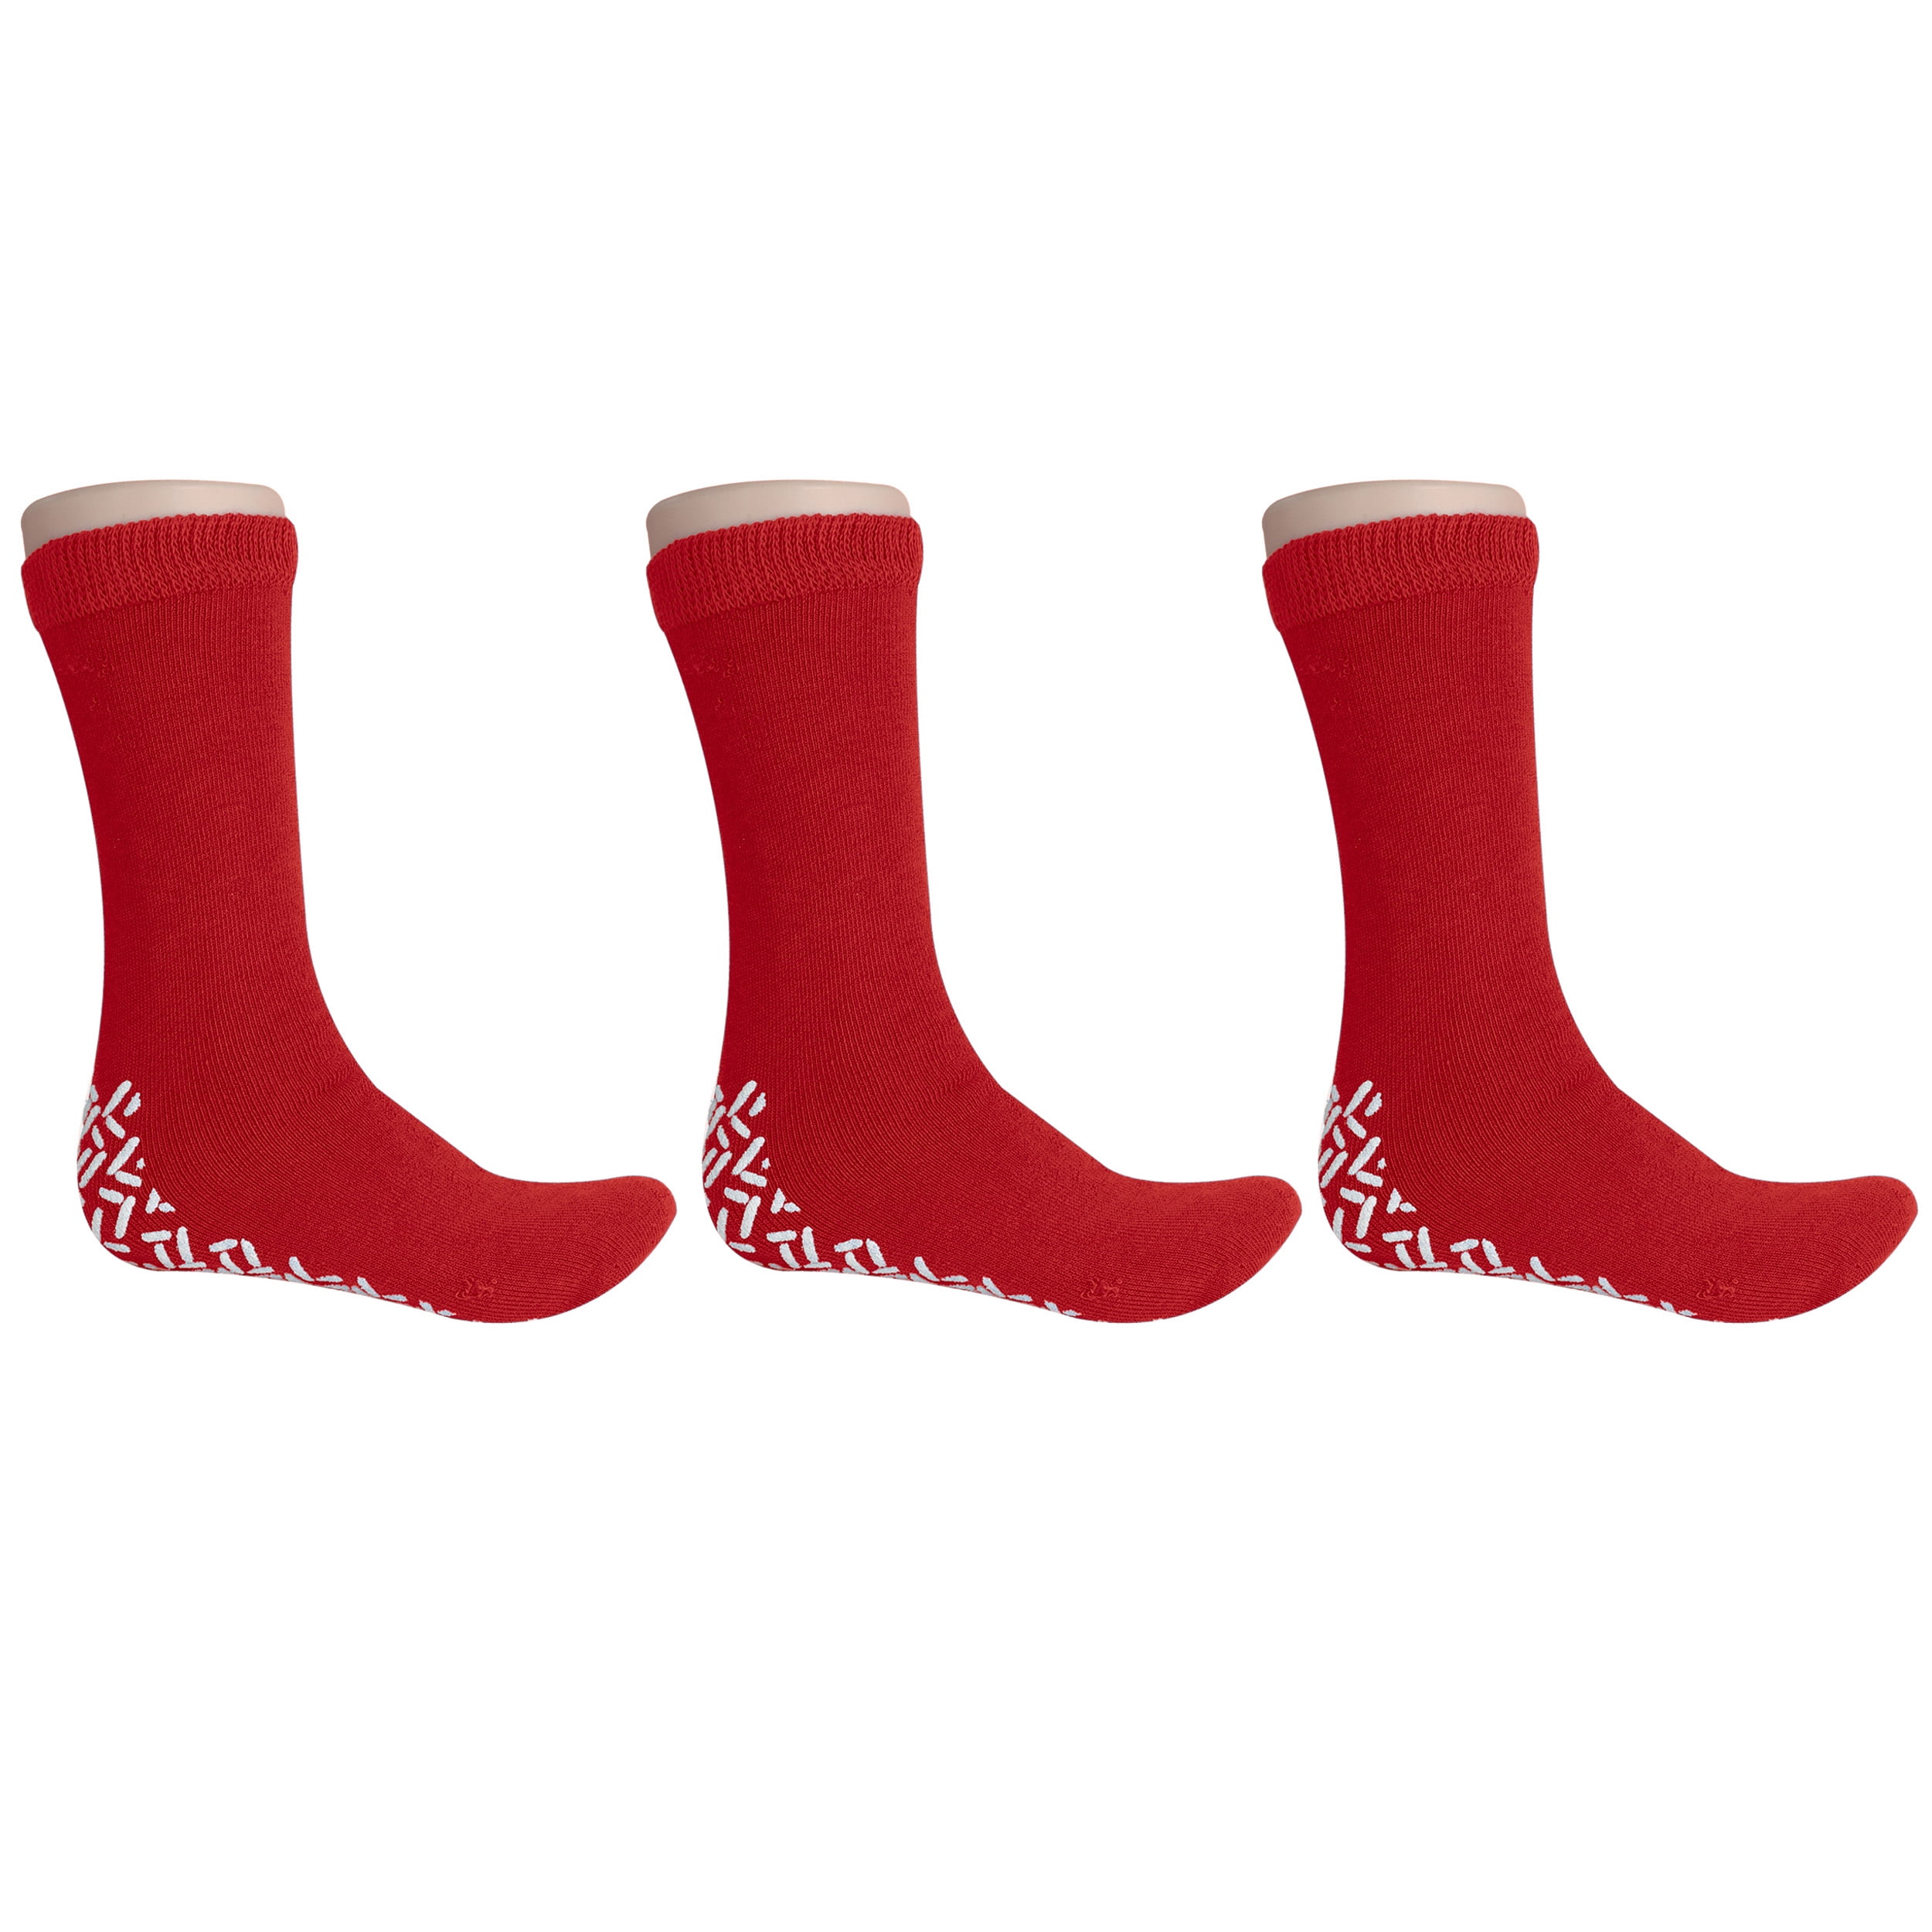 Personal Touch Top of the Line Mid-Calf Hospital Slipper Socks